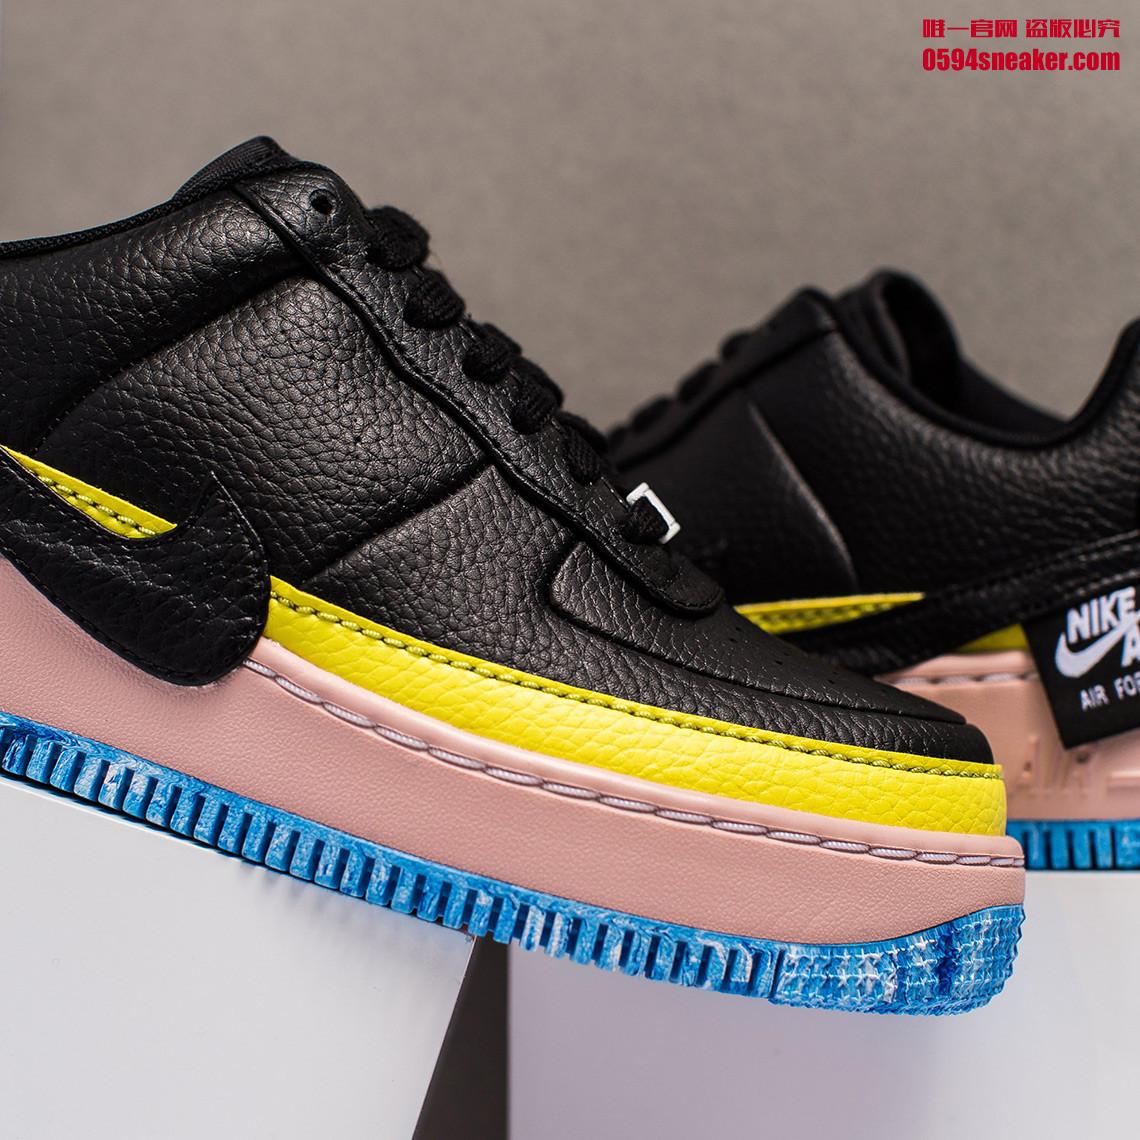 Nike,Air Force 1 Low Jester  专为女生打造！全新配色 Air Force 1 Low Jester 下周发售！